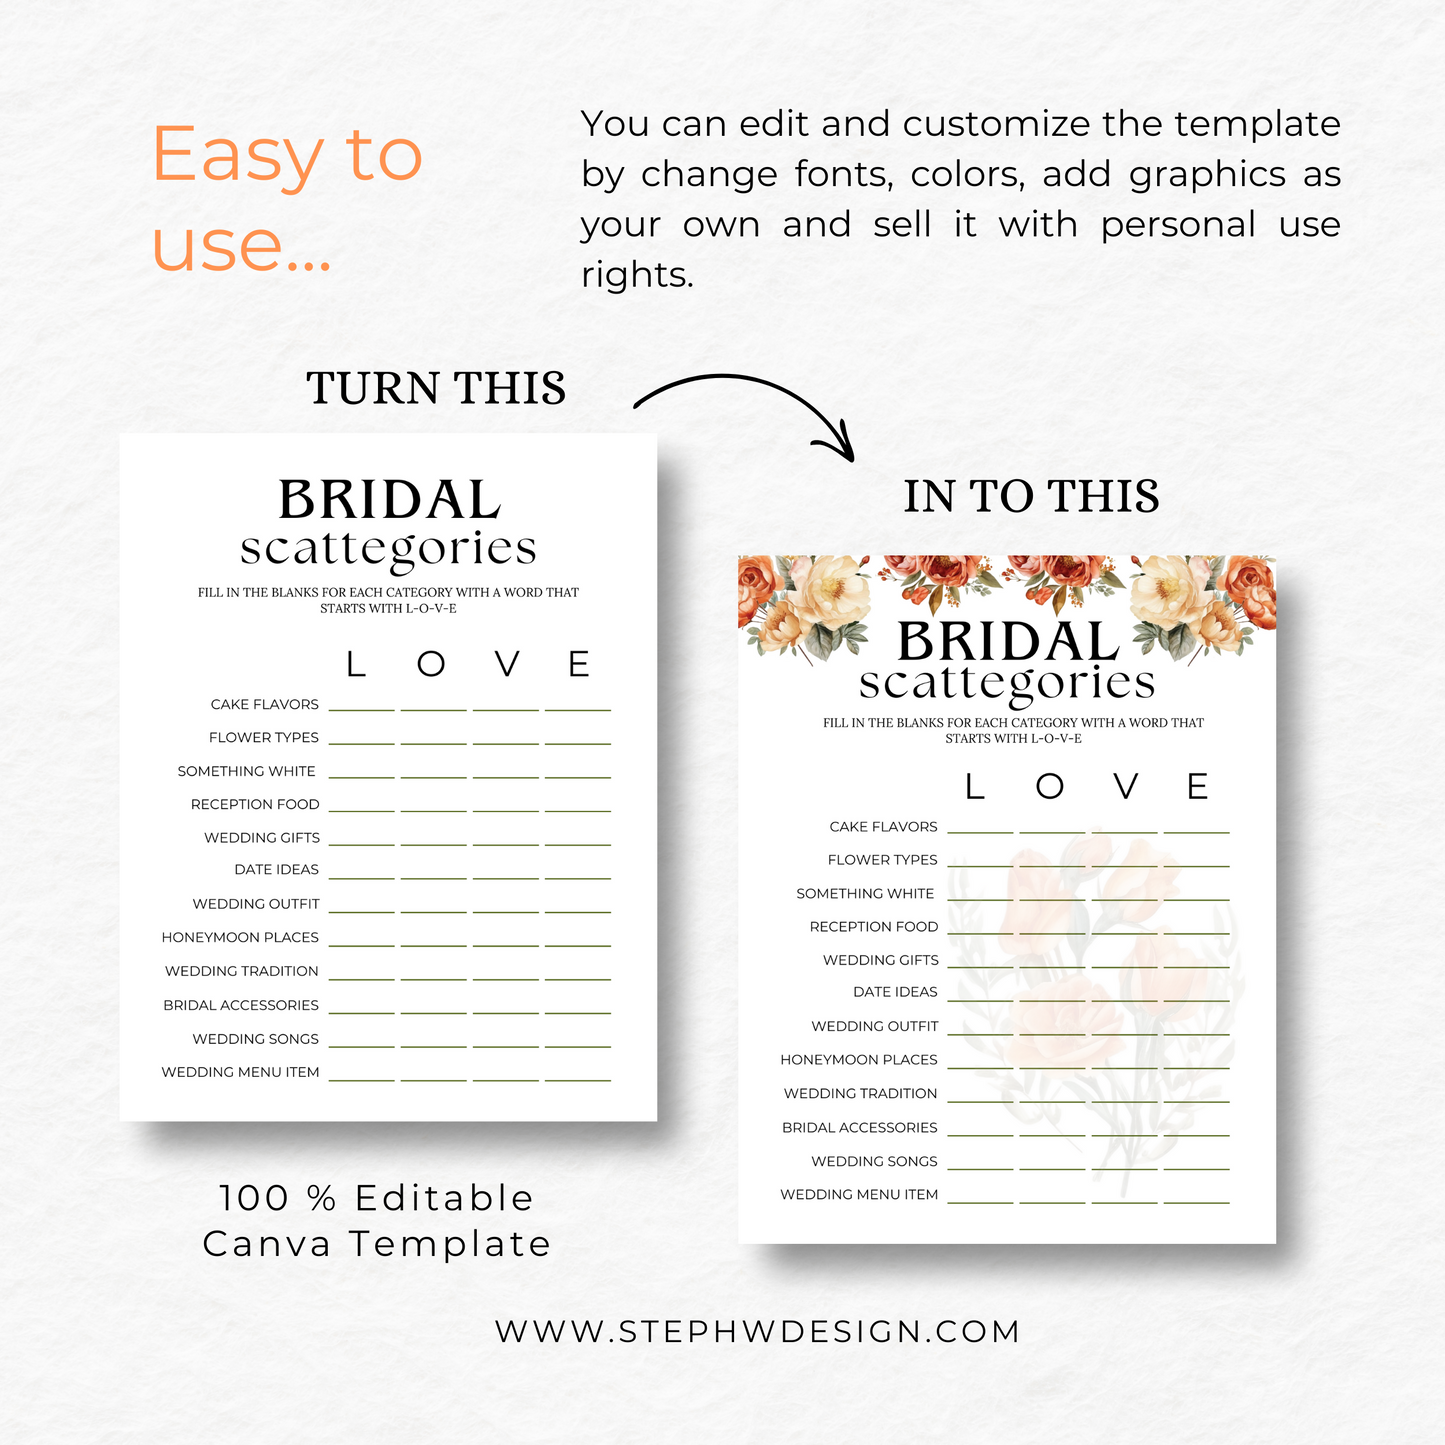 PLR - Bridal Shower Games Template (Commercial Use)